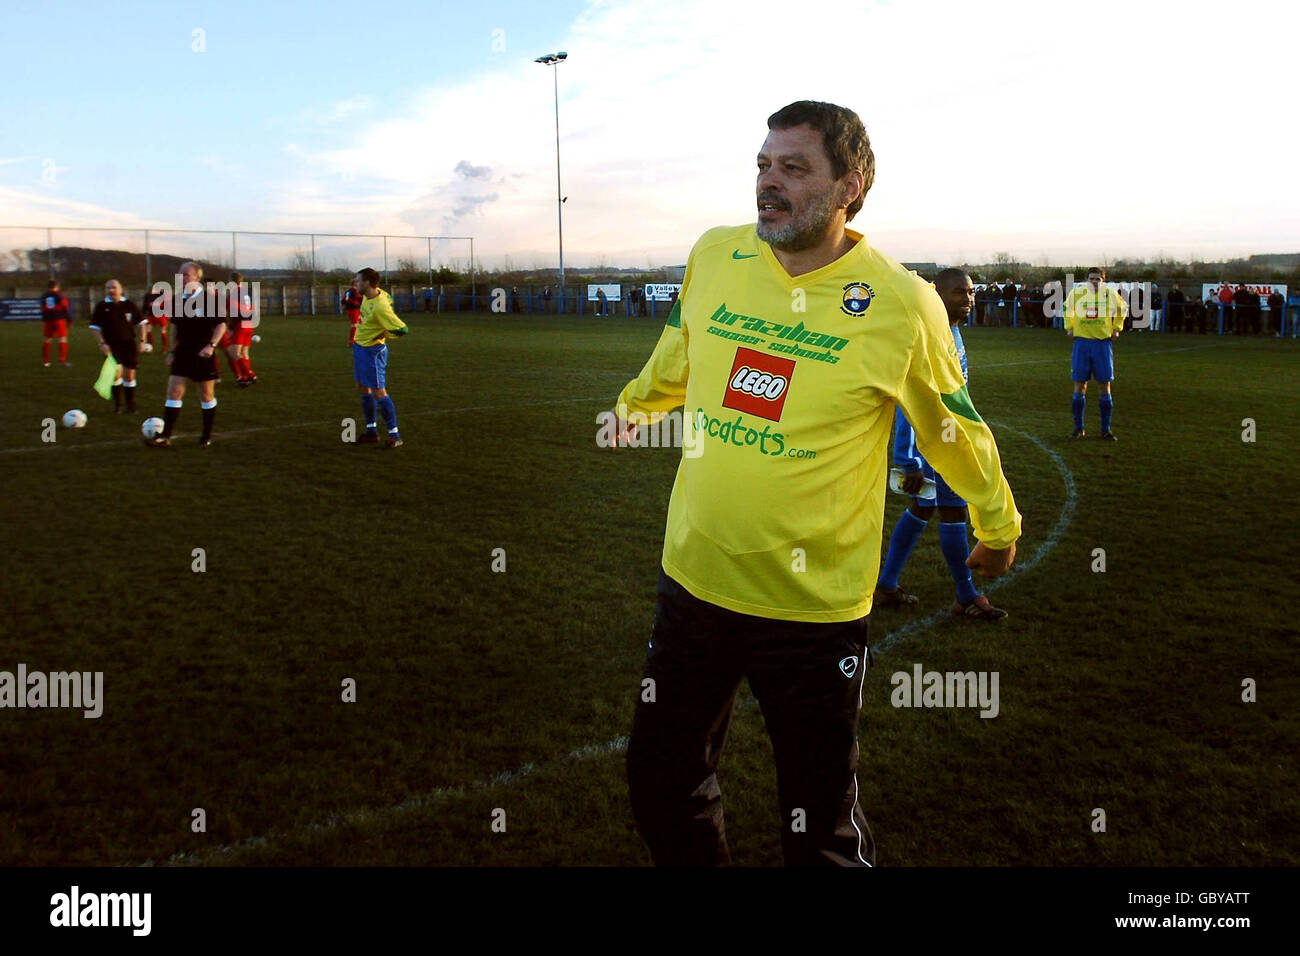 Fußball - Northern Counties East League - Premier Division - Garforth Town V Tadcaster Albion Stockfoto